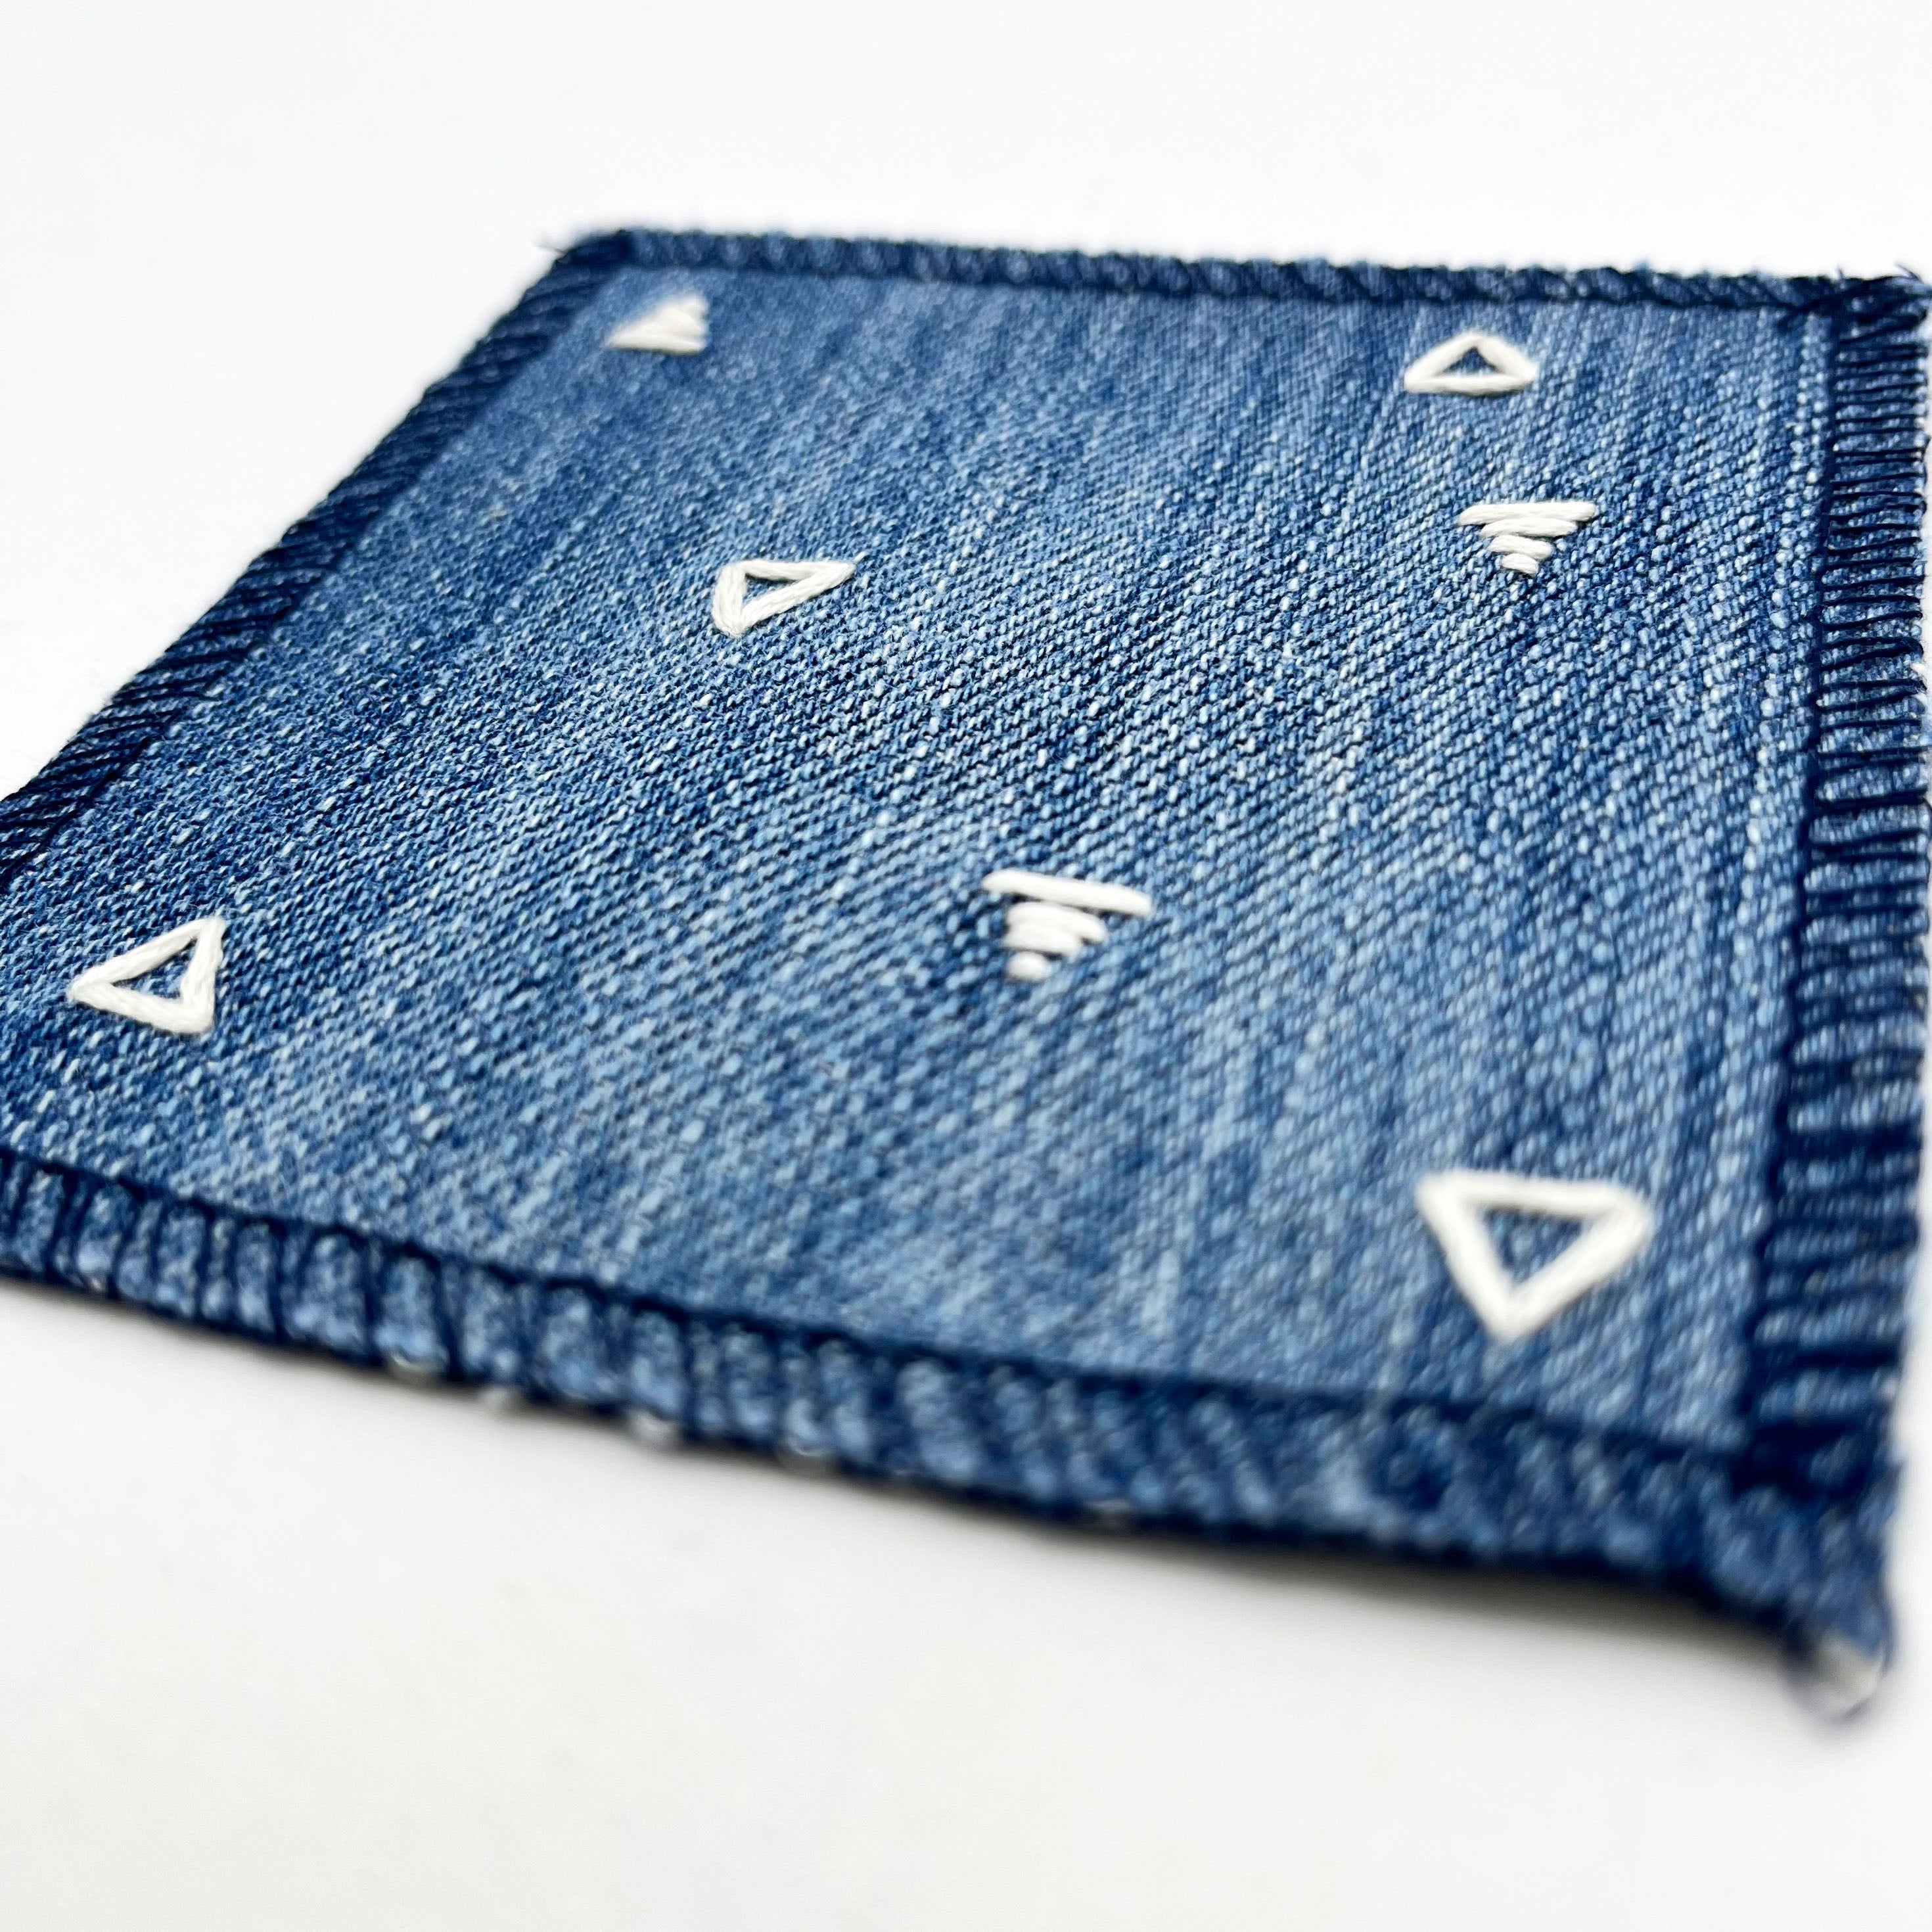 Square Patch with Embroidered Triangles